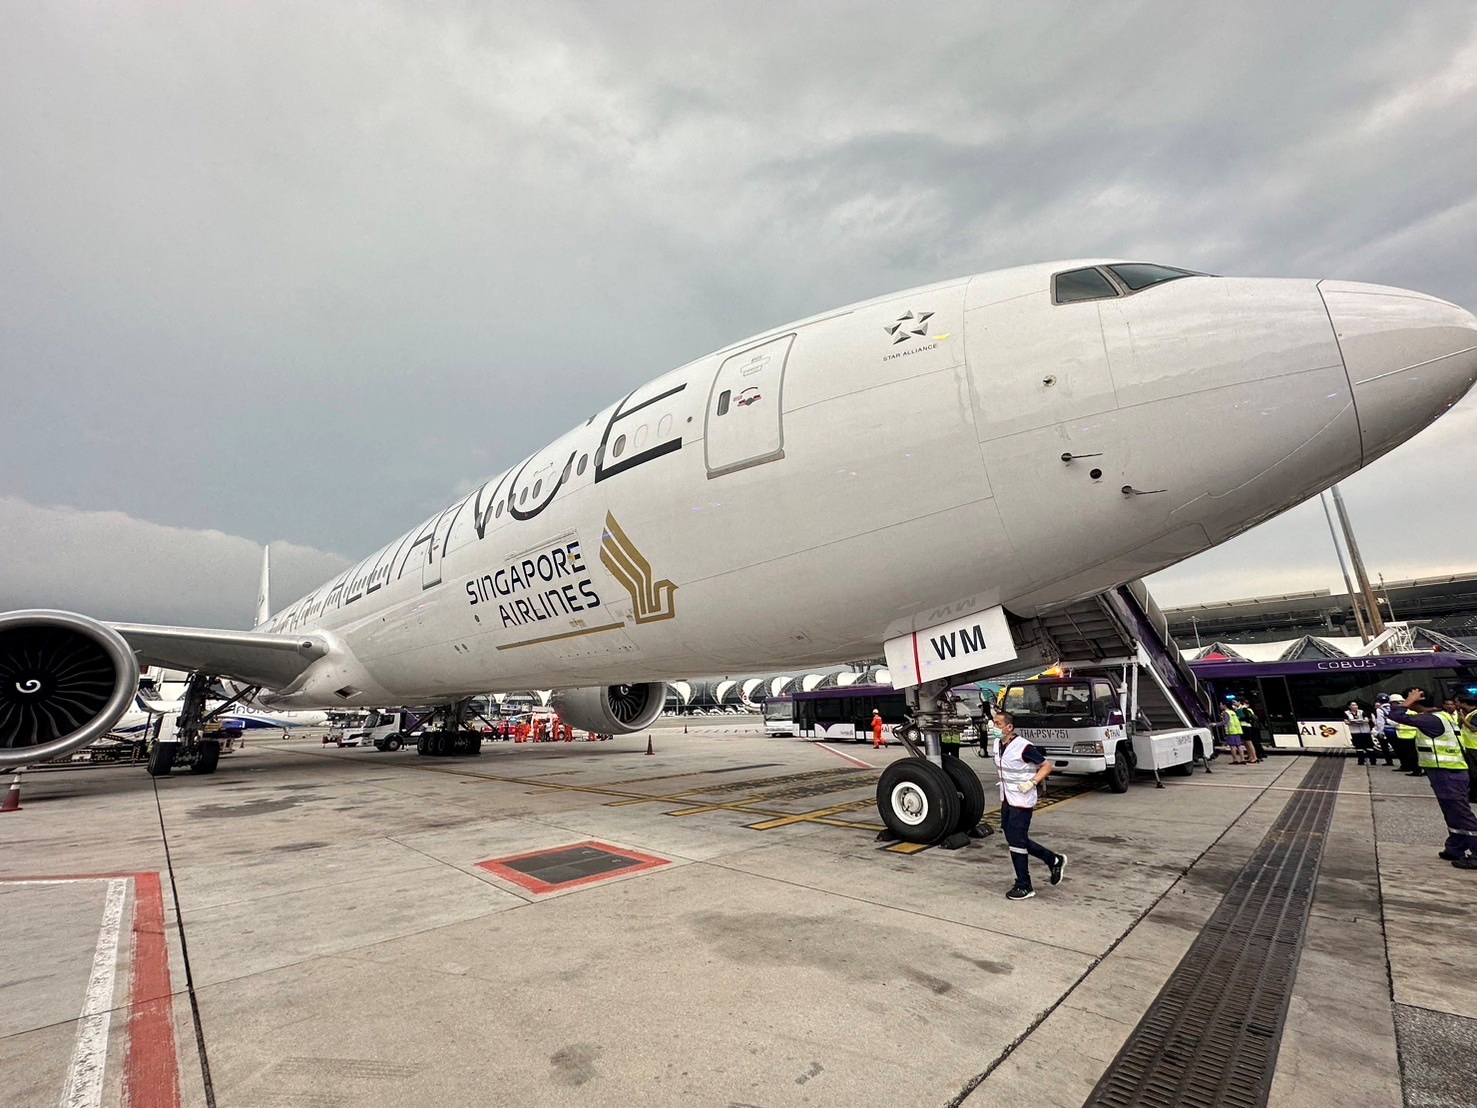 A Singapore airline aircraft is seen on tarmac after requesting an emergency landing at Bangkok's Suvarnabhumi International airport, Thailand